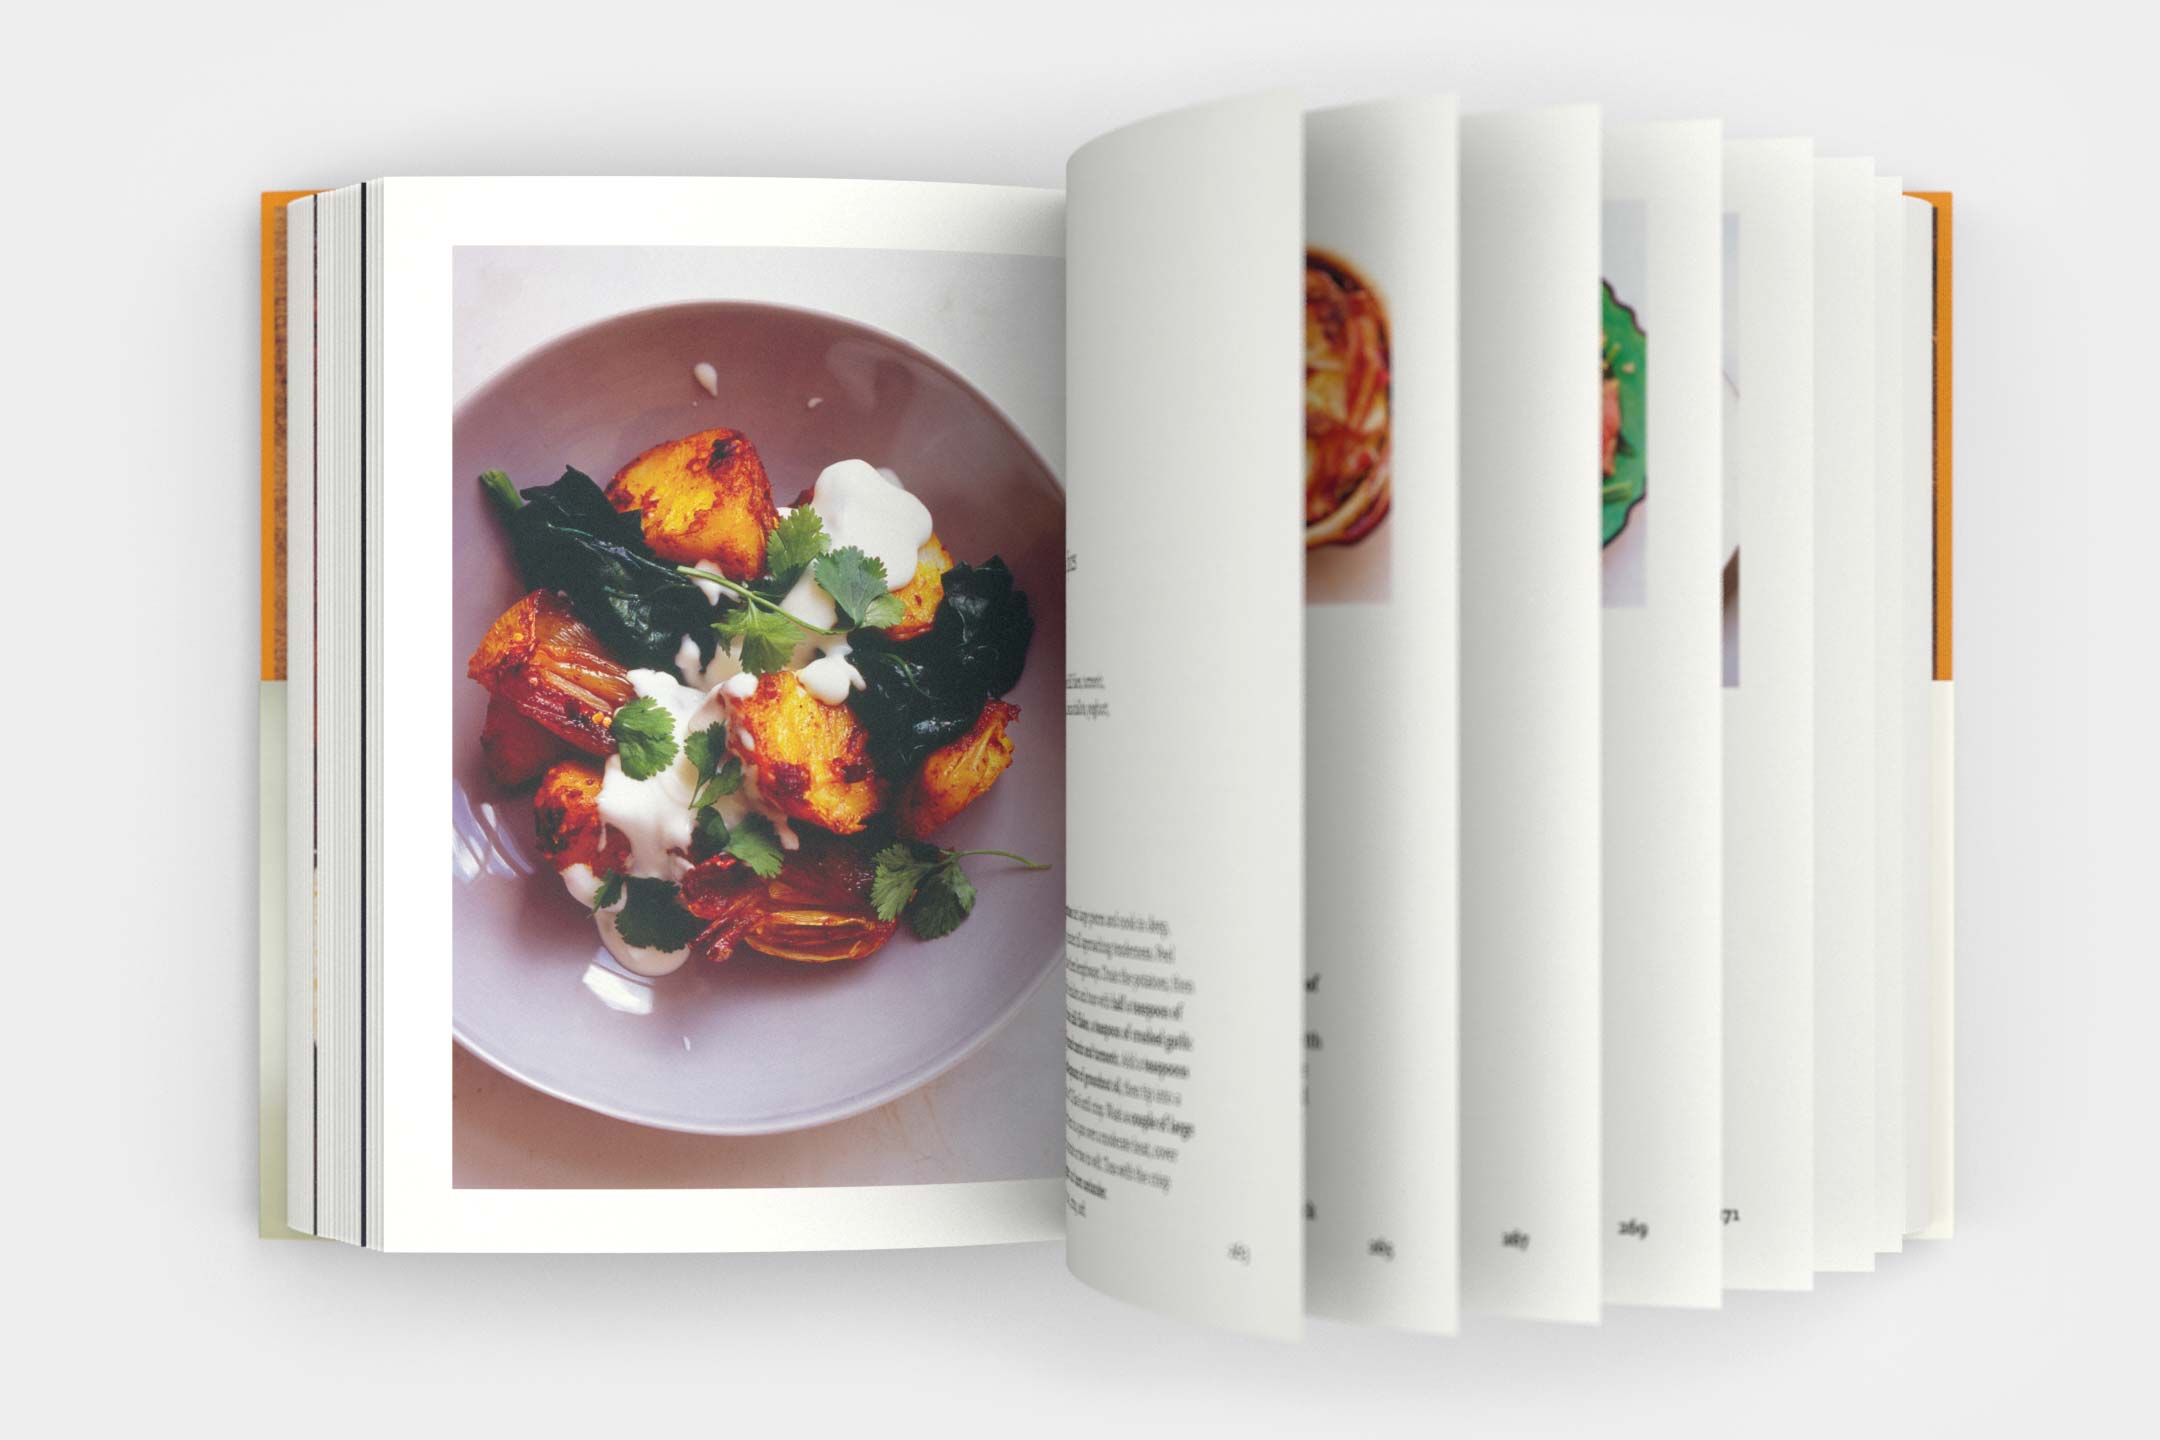 Nigel Slater, Eat. Animated product visualisation for One Darnley Road